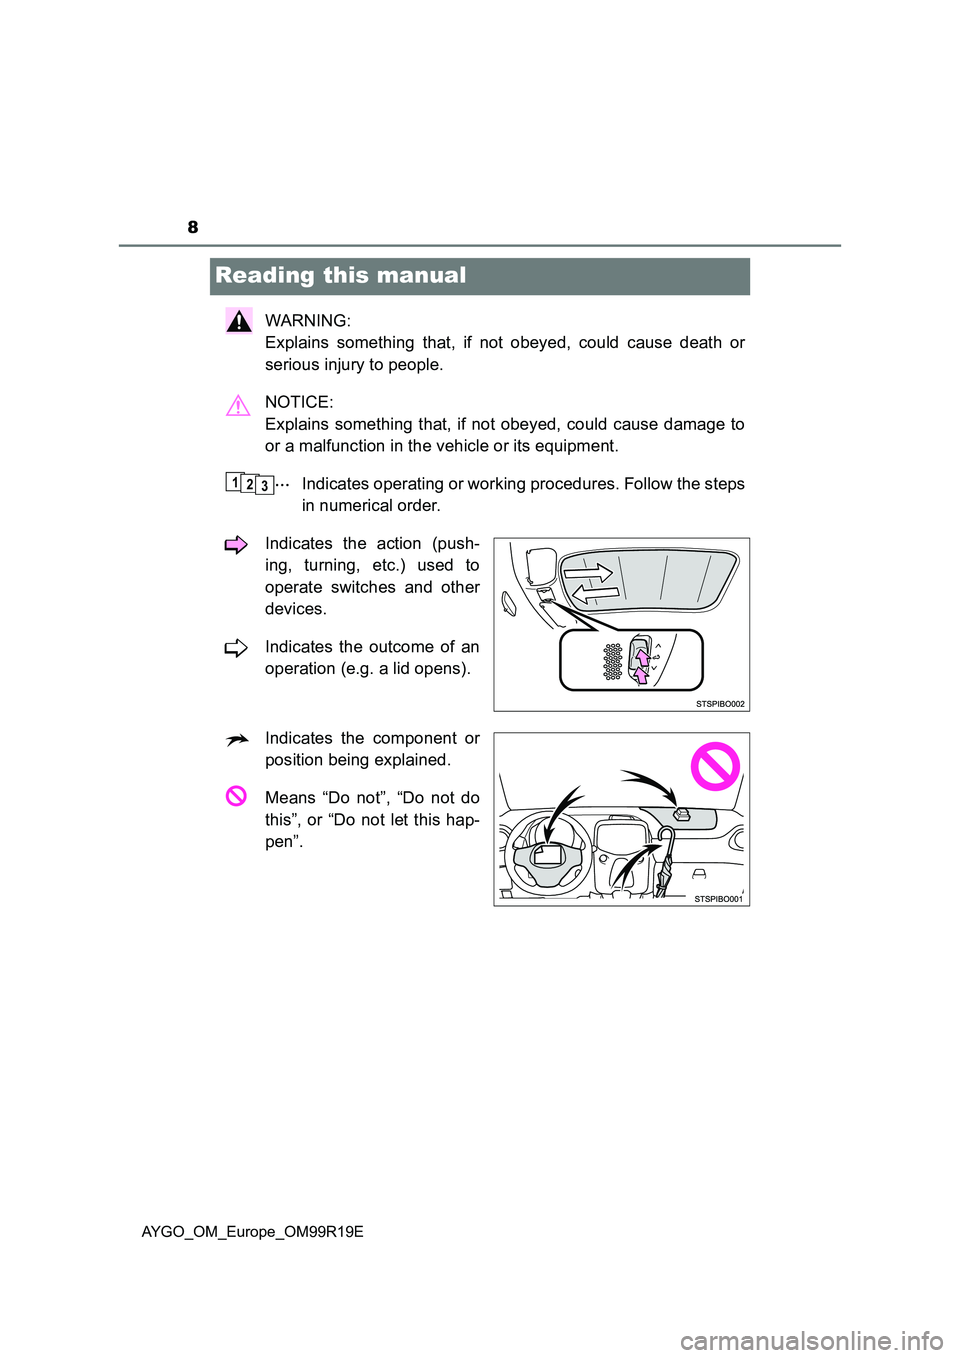 TOYOTA AYGO 2019  Owners Manual (in English) 8
AYGO_OM_Europe_OM99R19E
Reading this manual
WARNING:  
Explains something that, if not obeyed, could cause death or 
serious injury to people. 
NOTICE:  
Explains something that, if not obeyed, coul